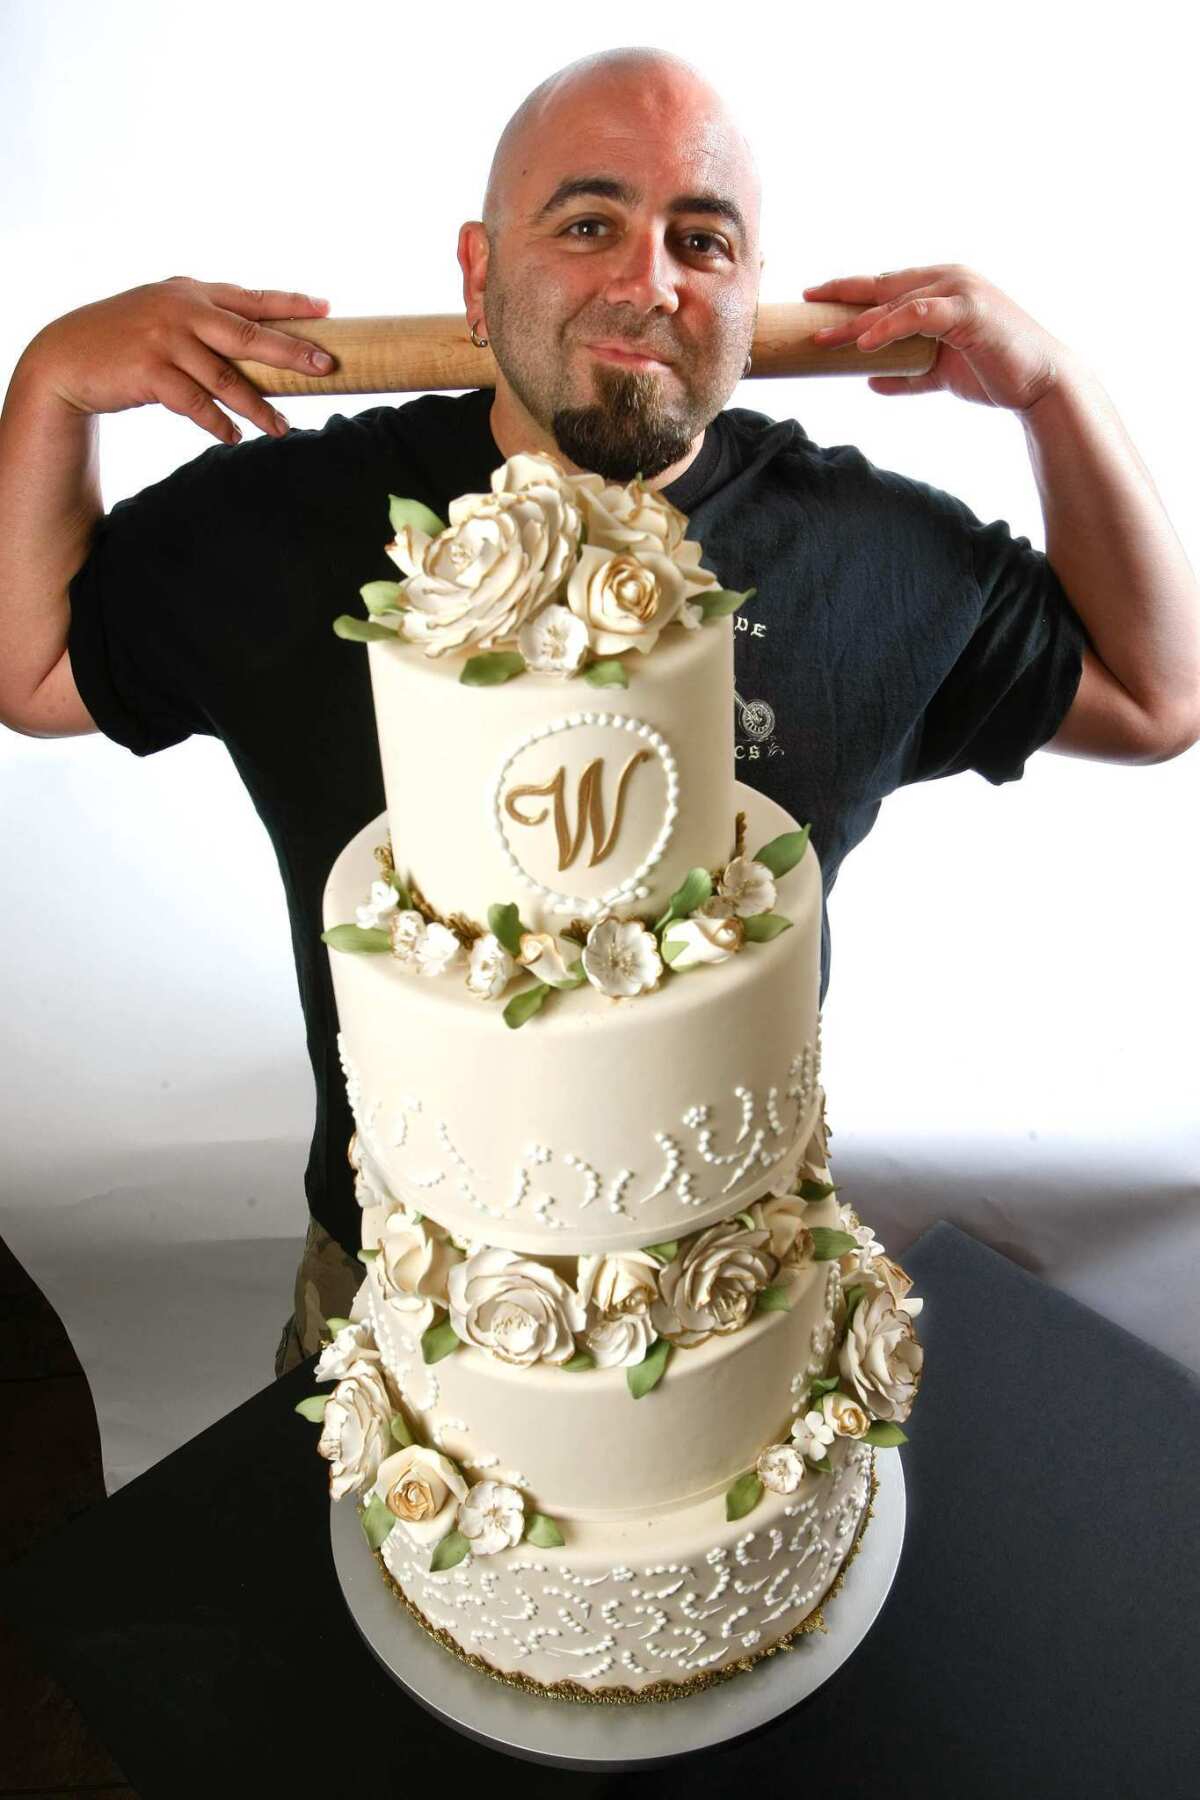 Duff Goldman, the cake baker behind the "Ace of Cakes" TV show, is photographed next to one of his designer cakes, a floral wedding cake at Charm City Cakes West, his new bakery in Los Angeles.